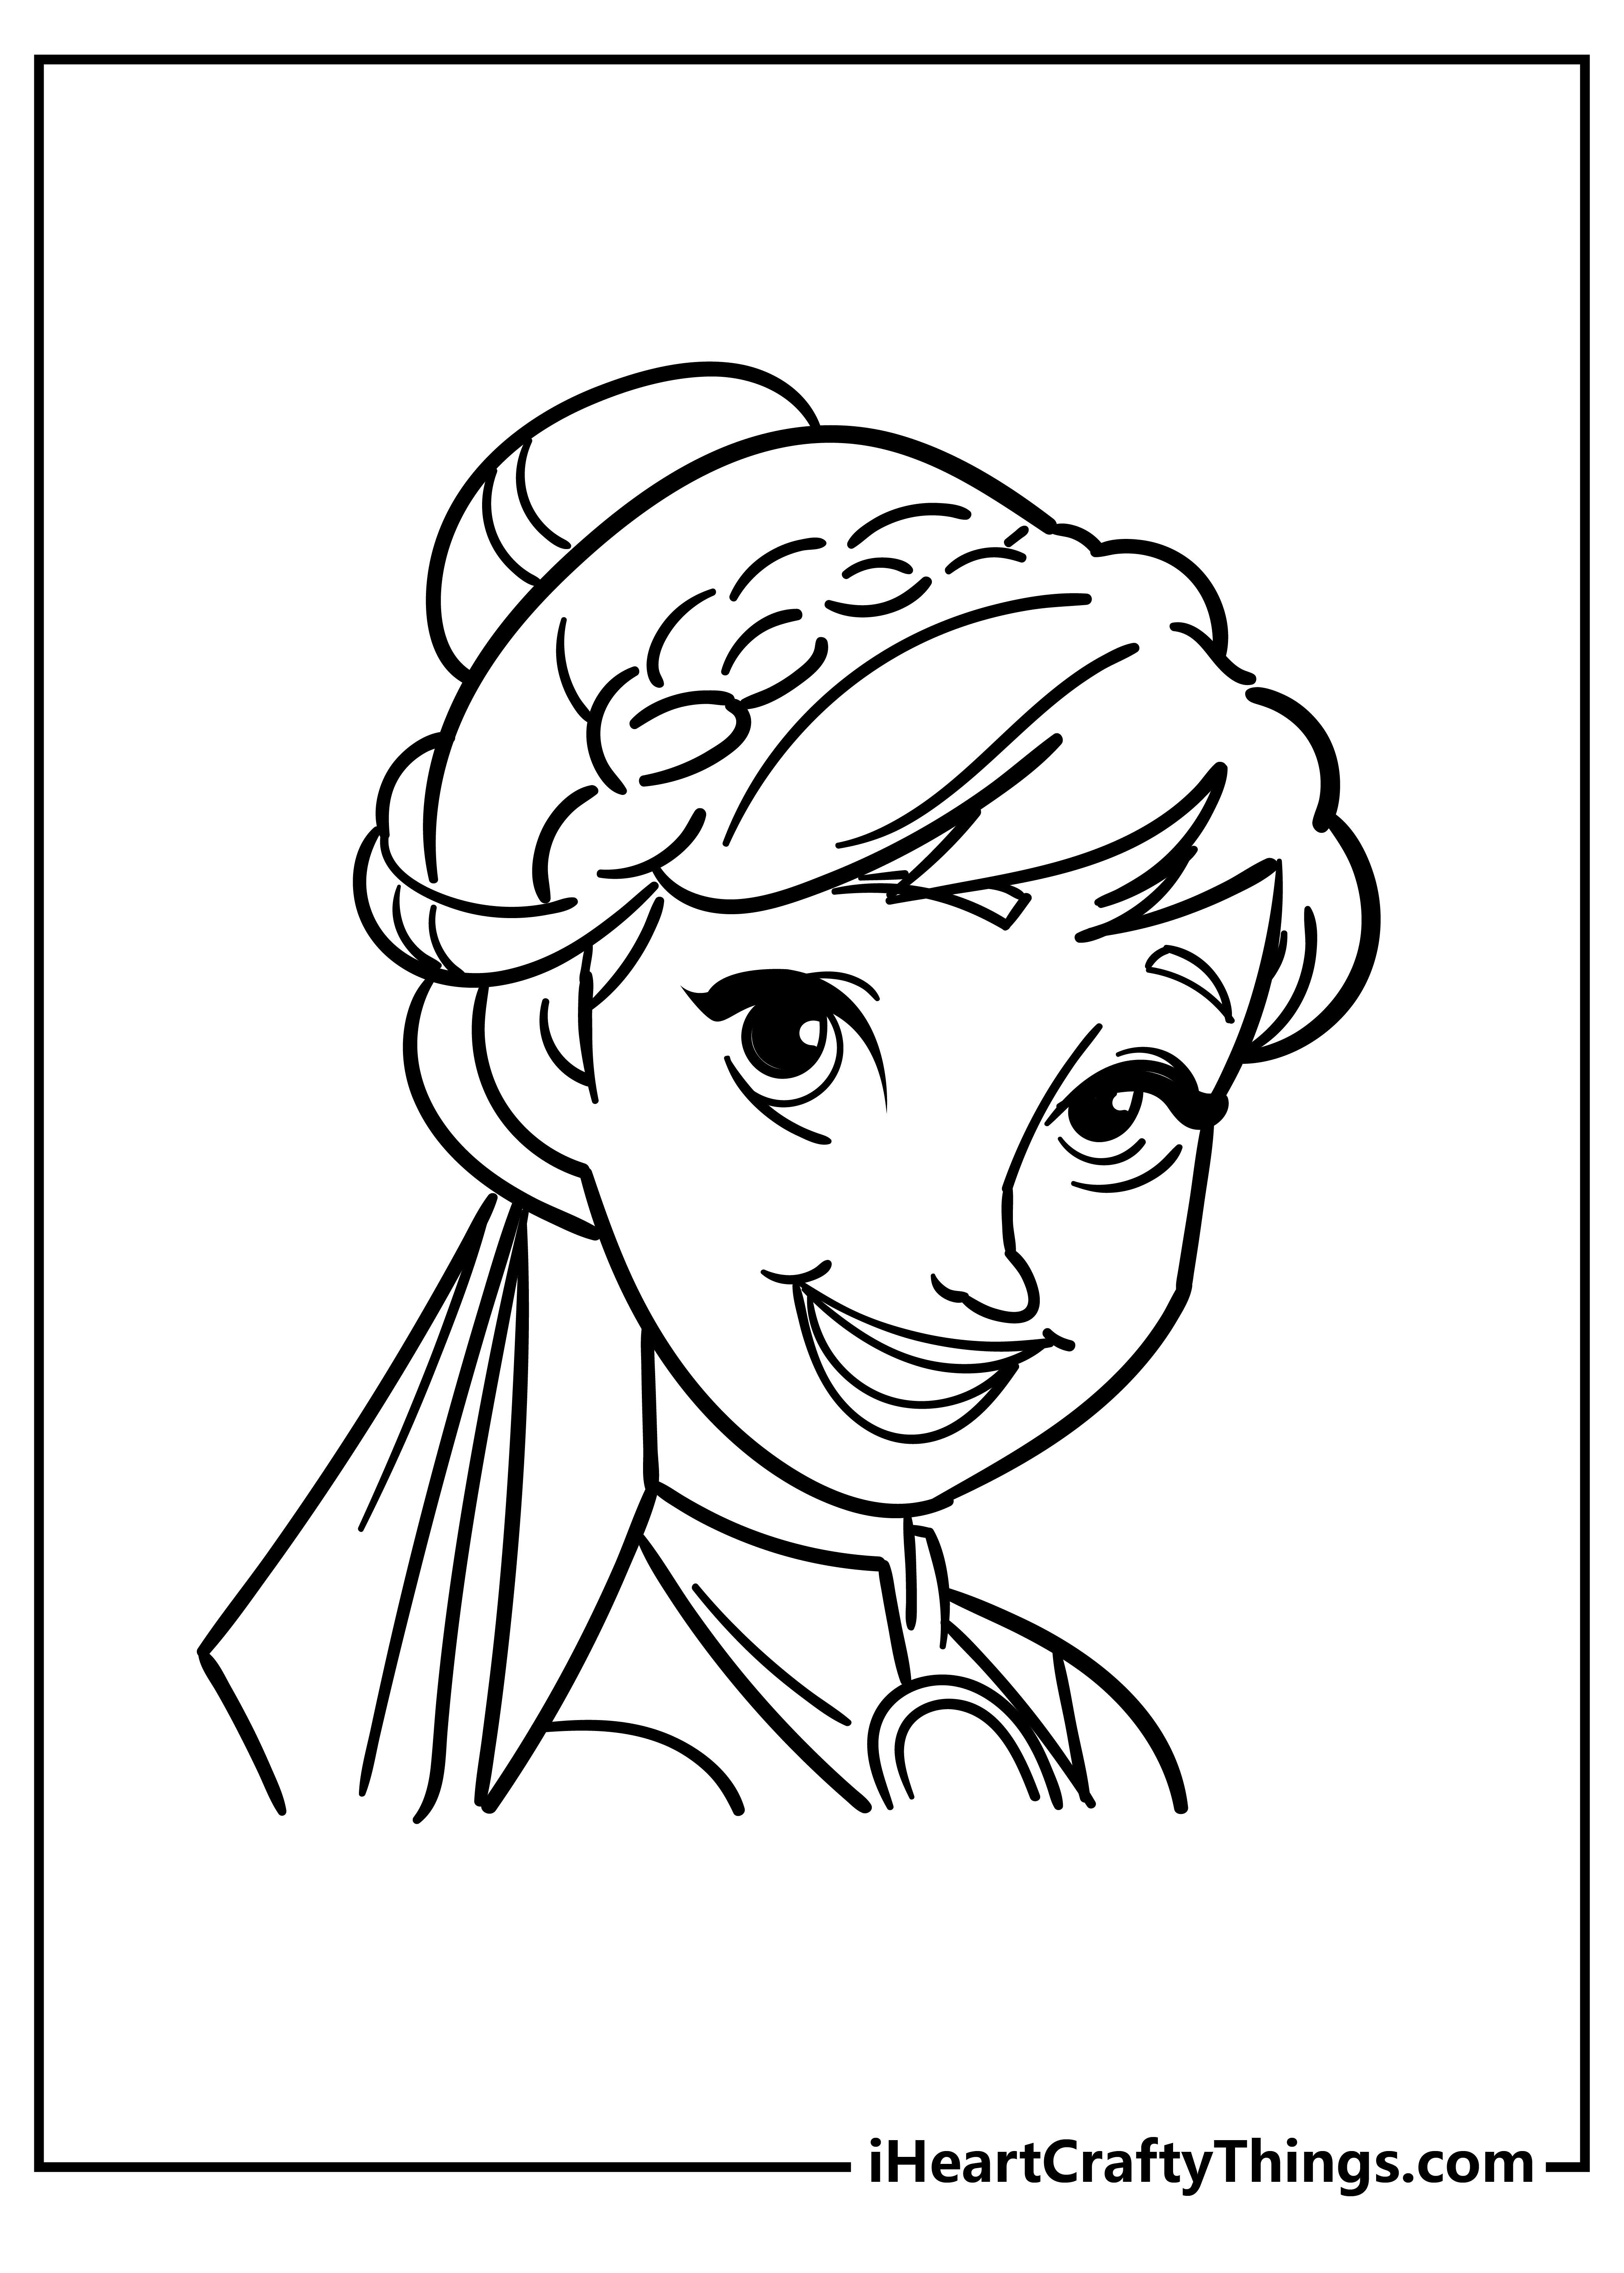 Anna coloring pages free printables